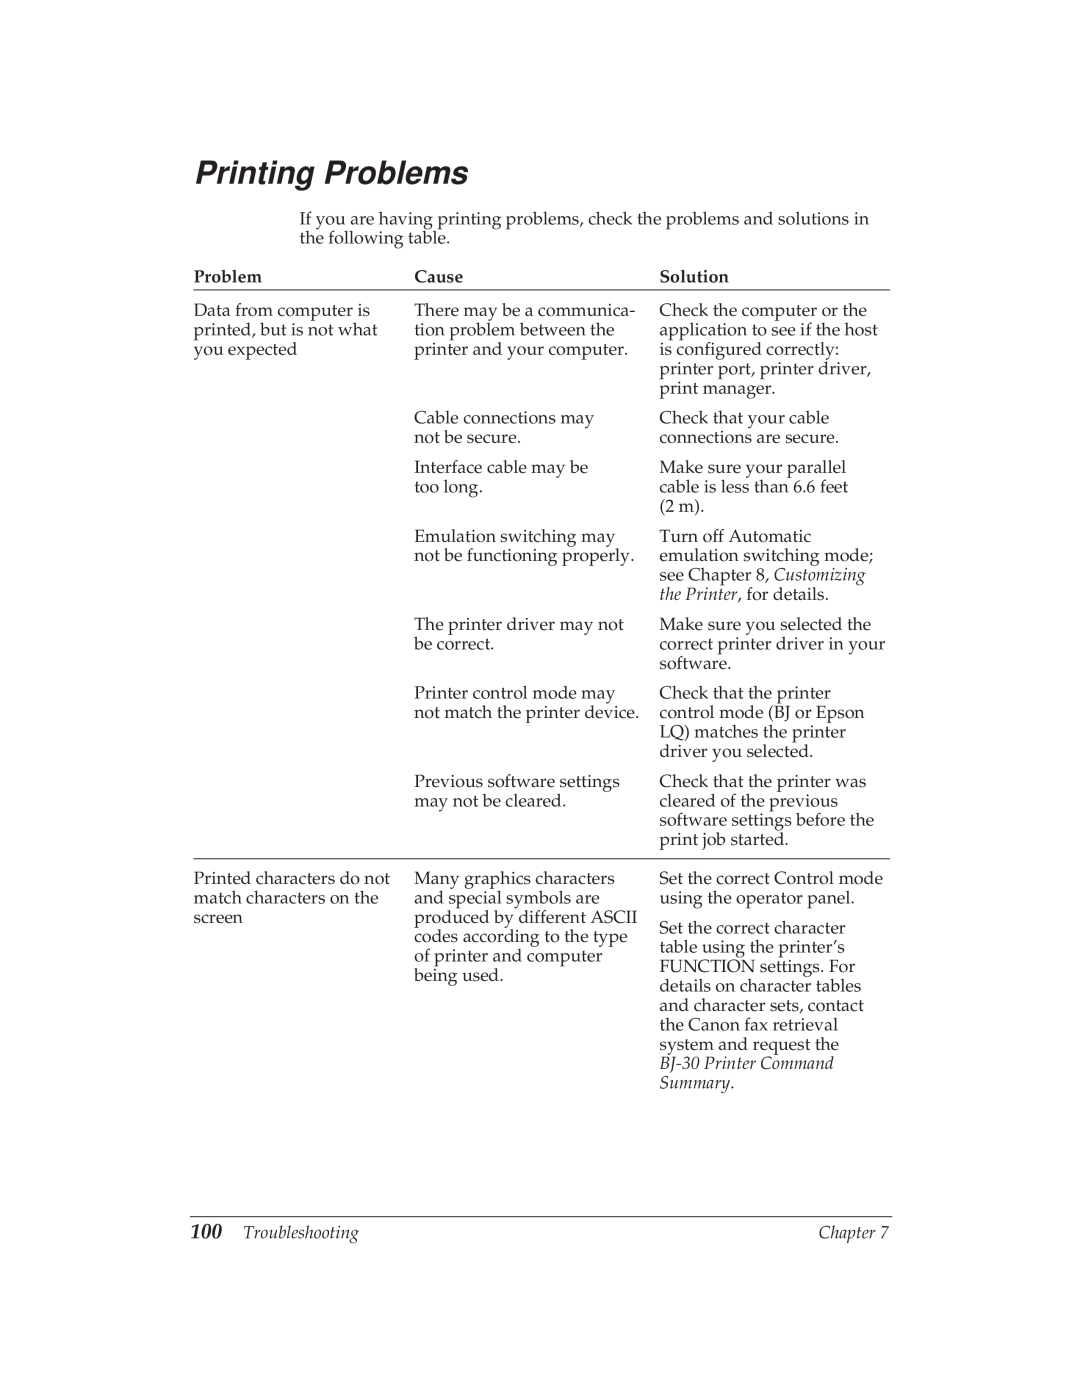 Canon BJ-30 manual Printing Problems, Cause, Solution, Troubleshooting 